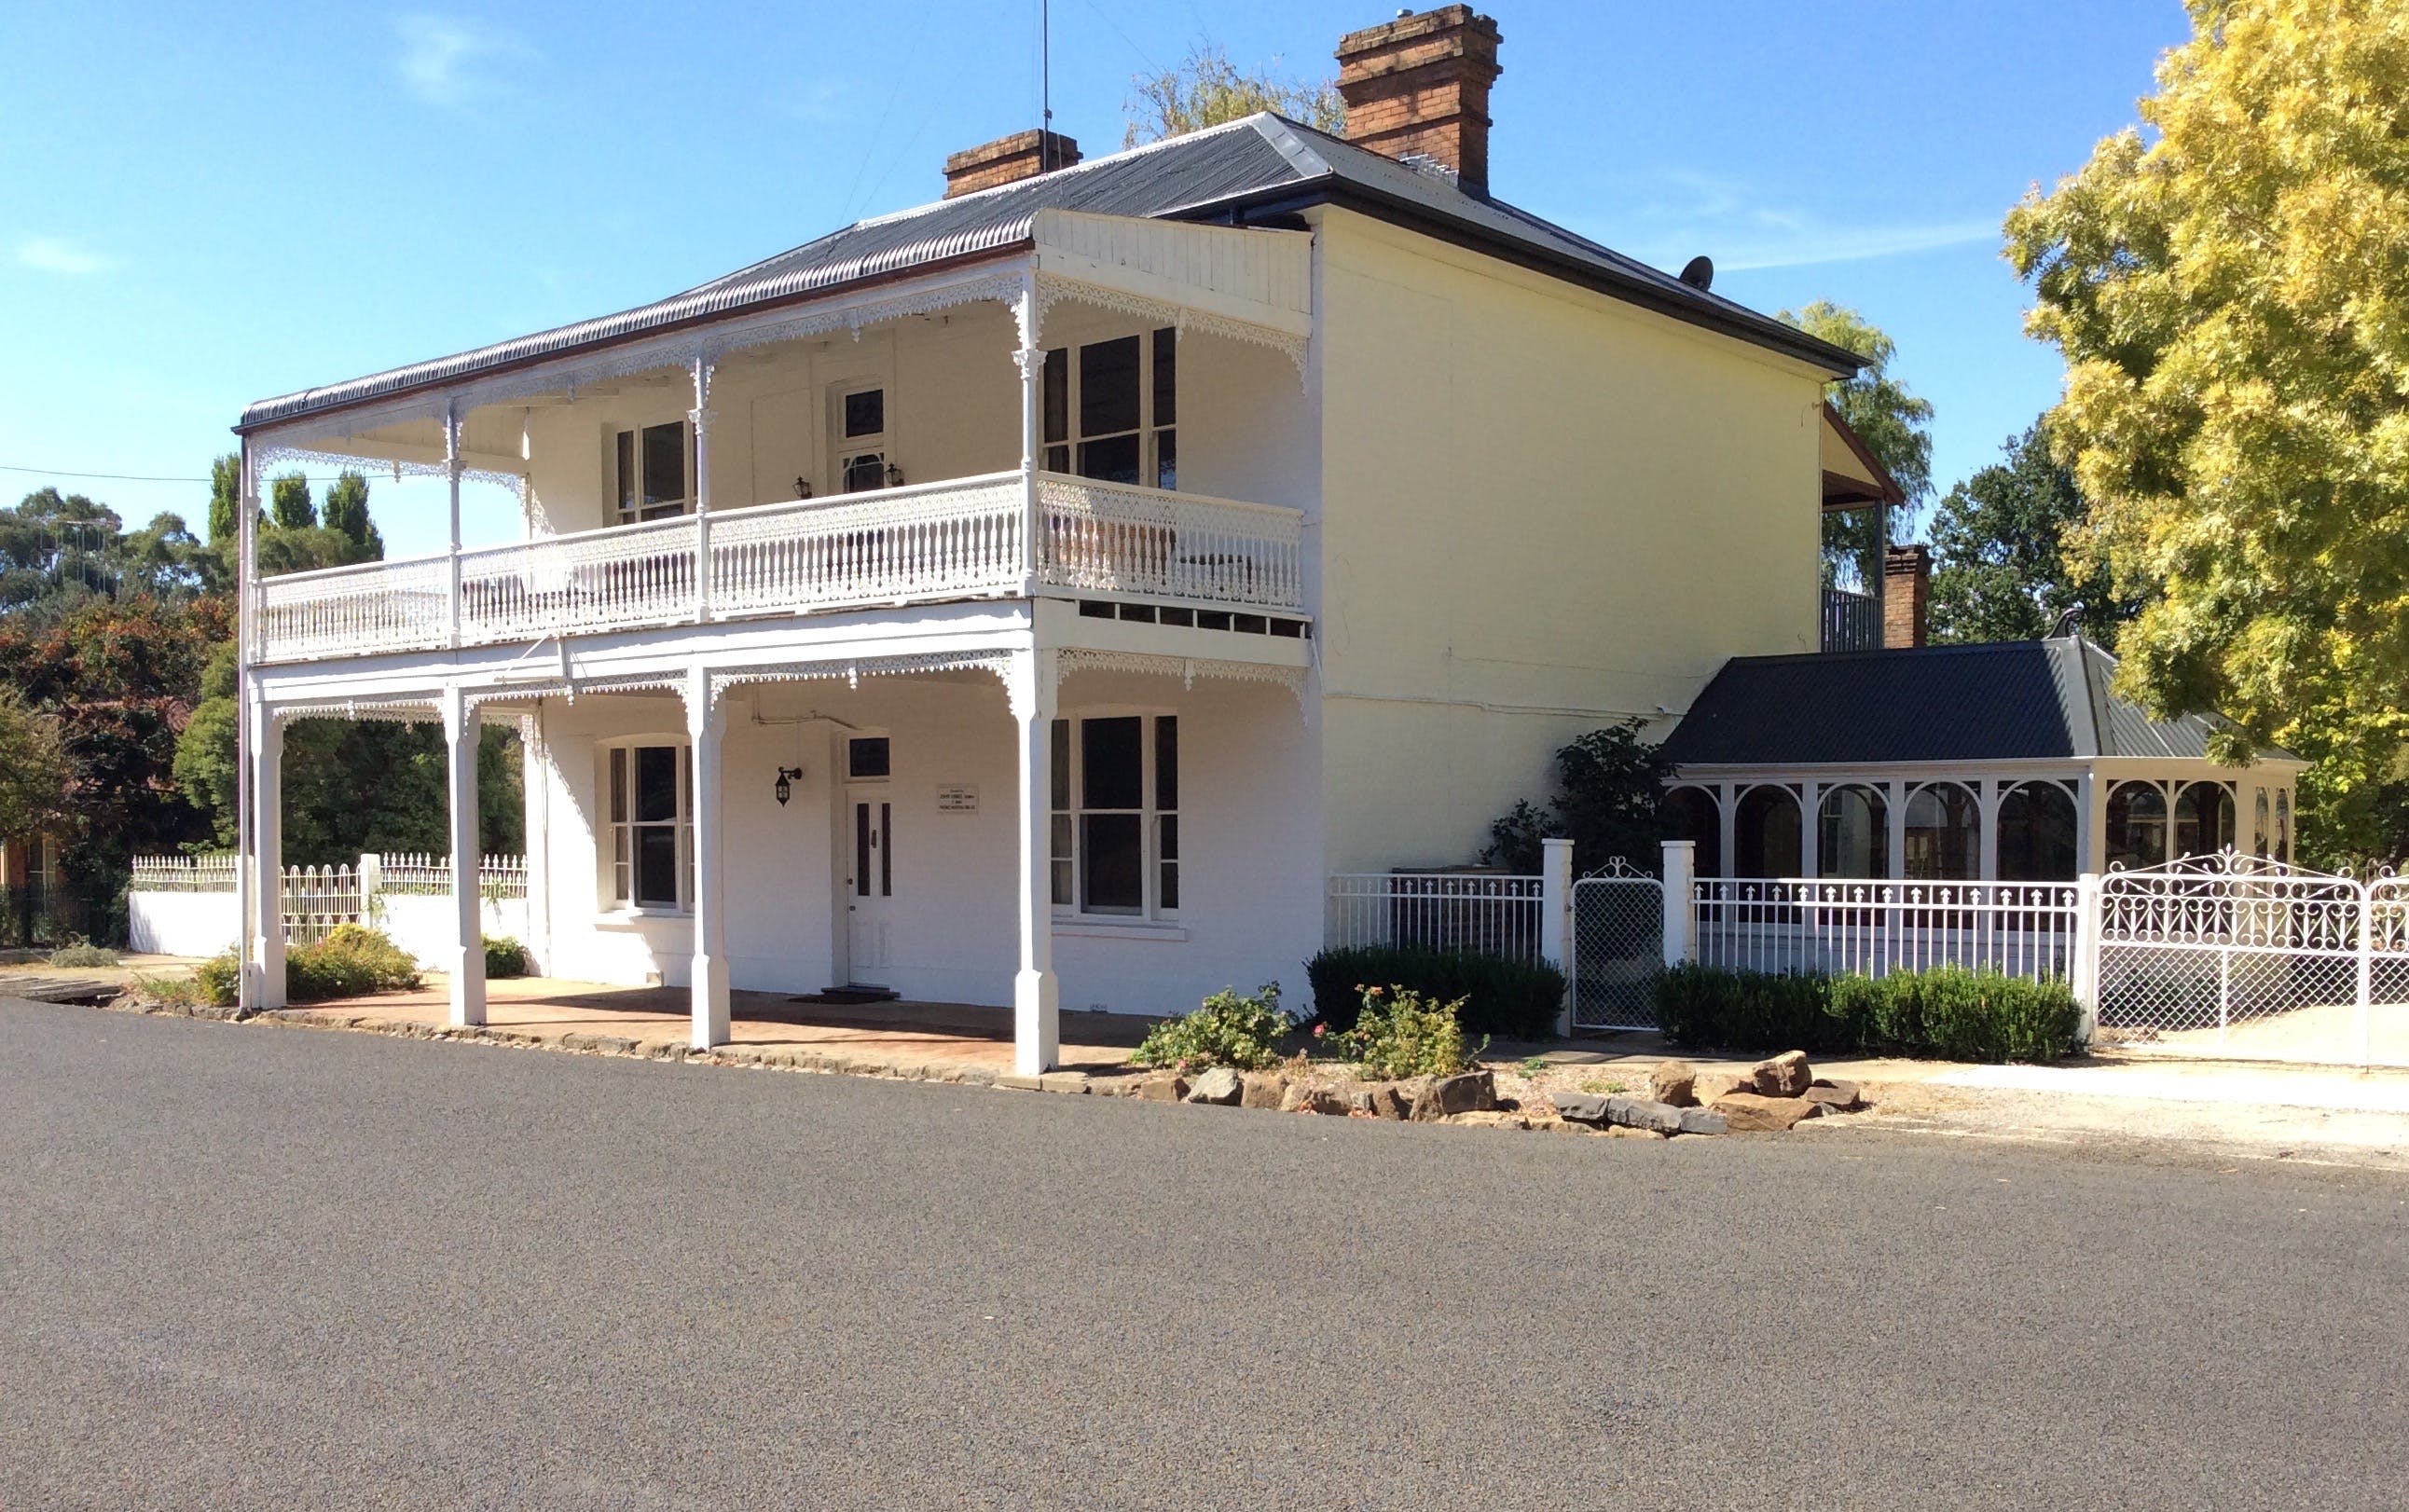 The White House Carcoar - Accommodation Find